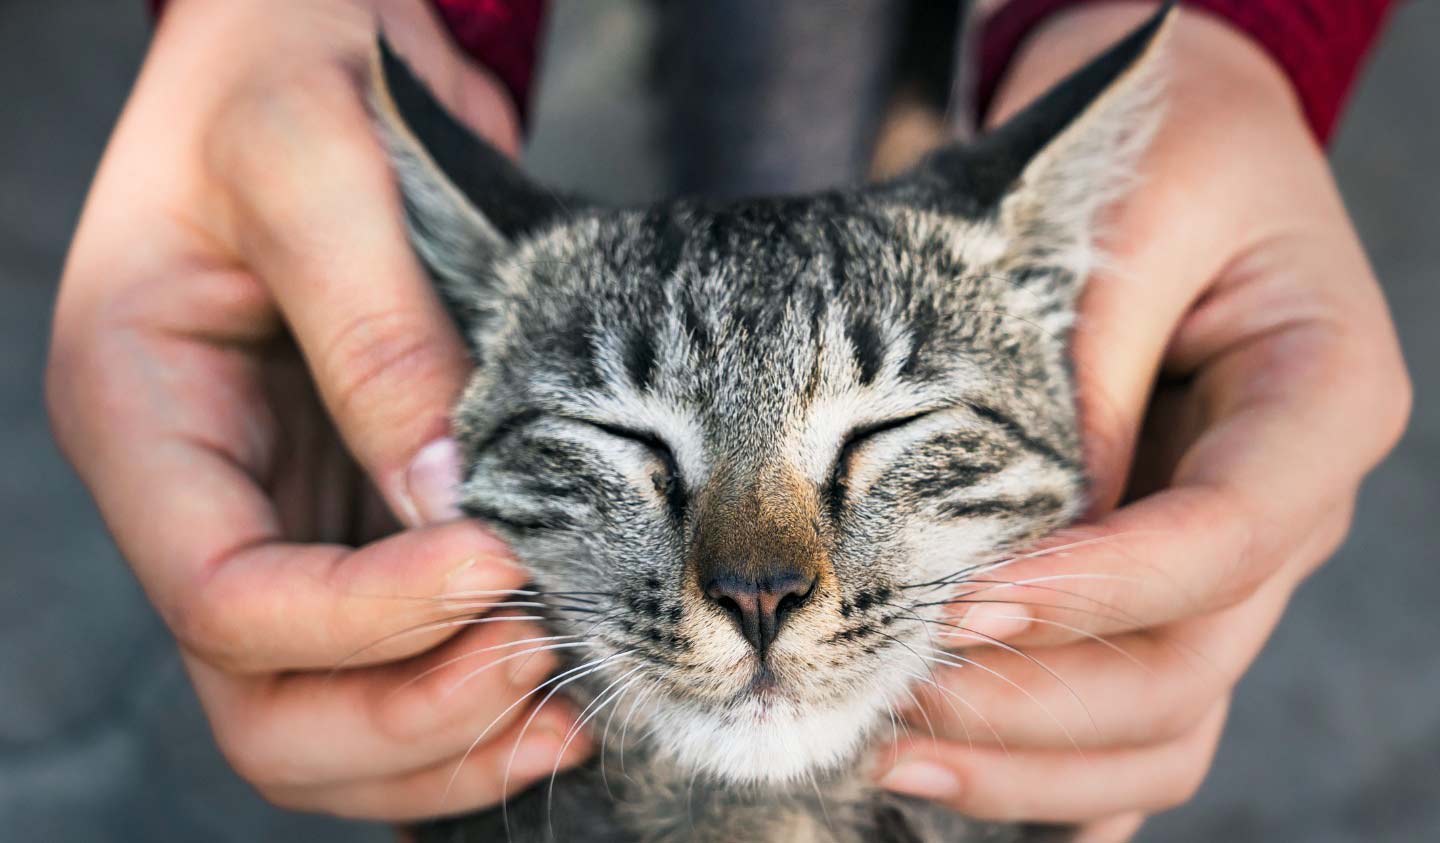 Photo of a woman's hands petting a cat's head